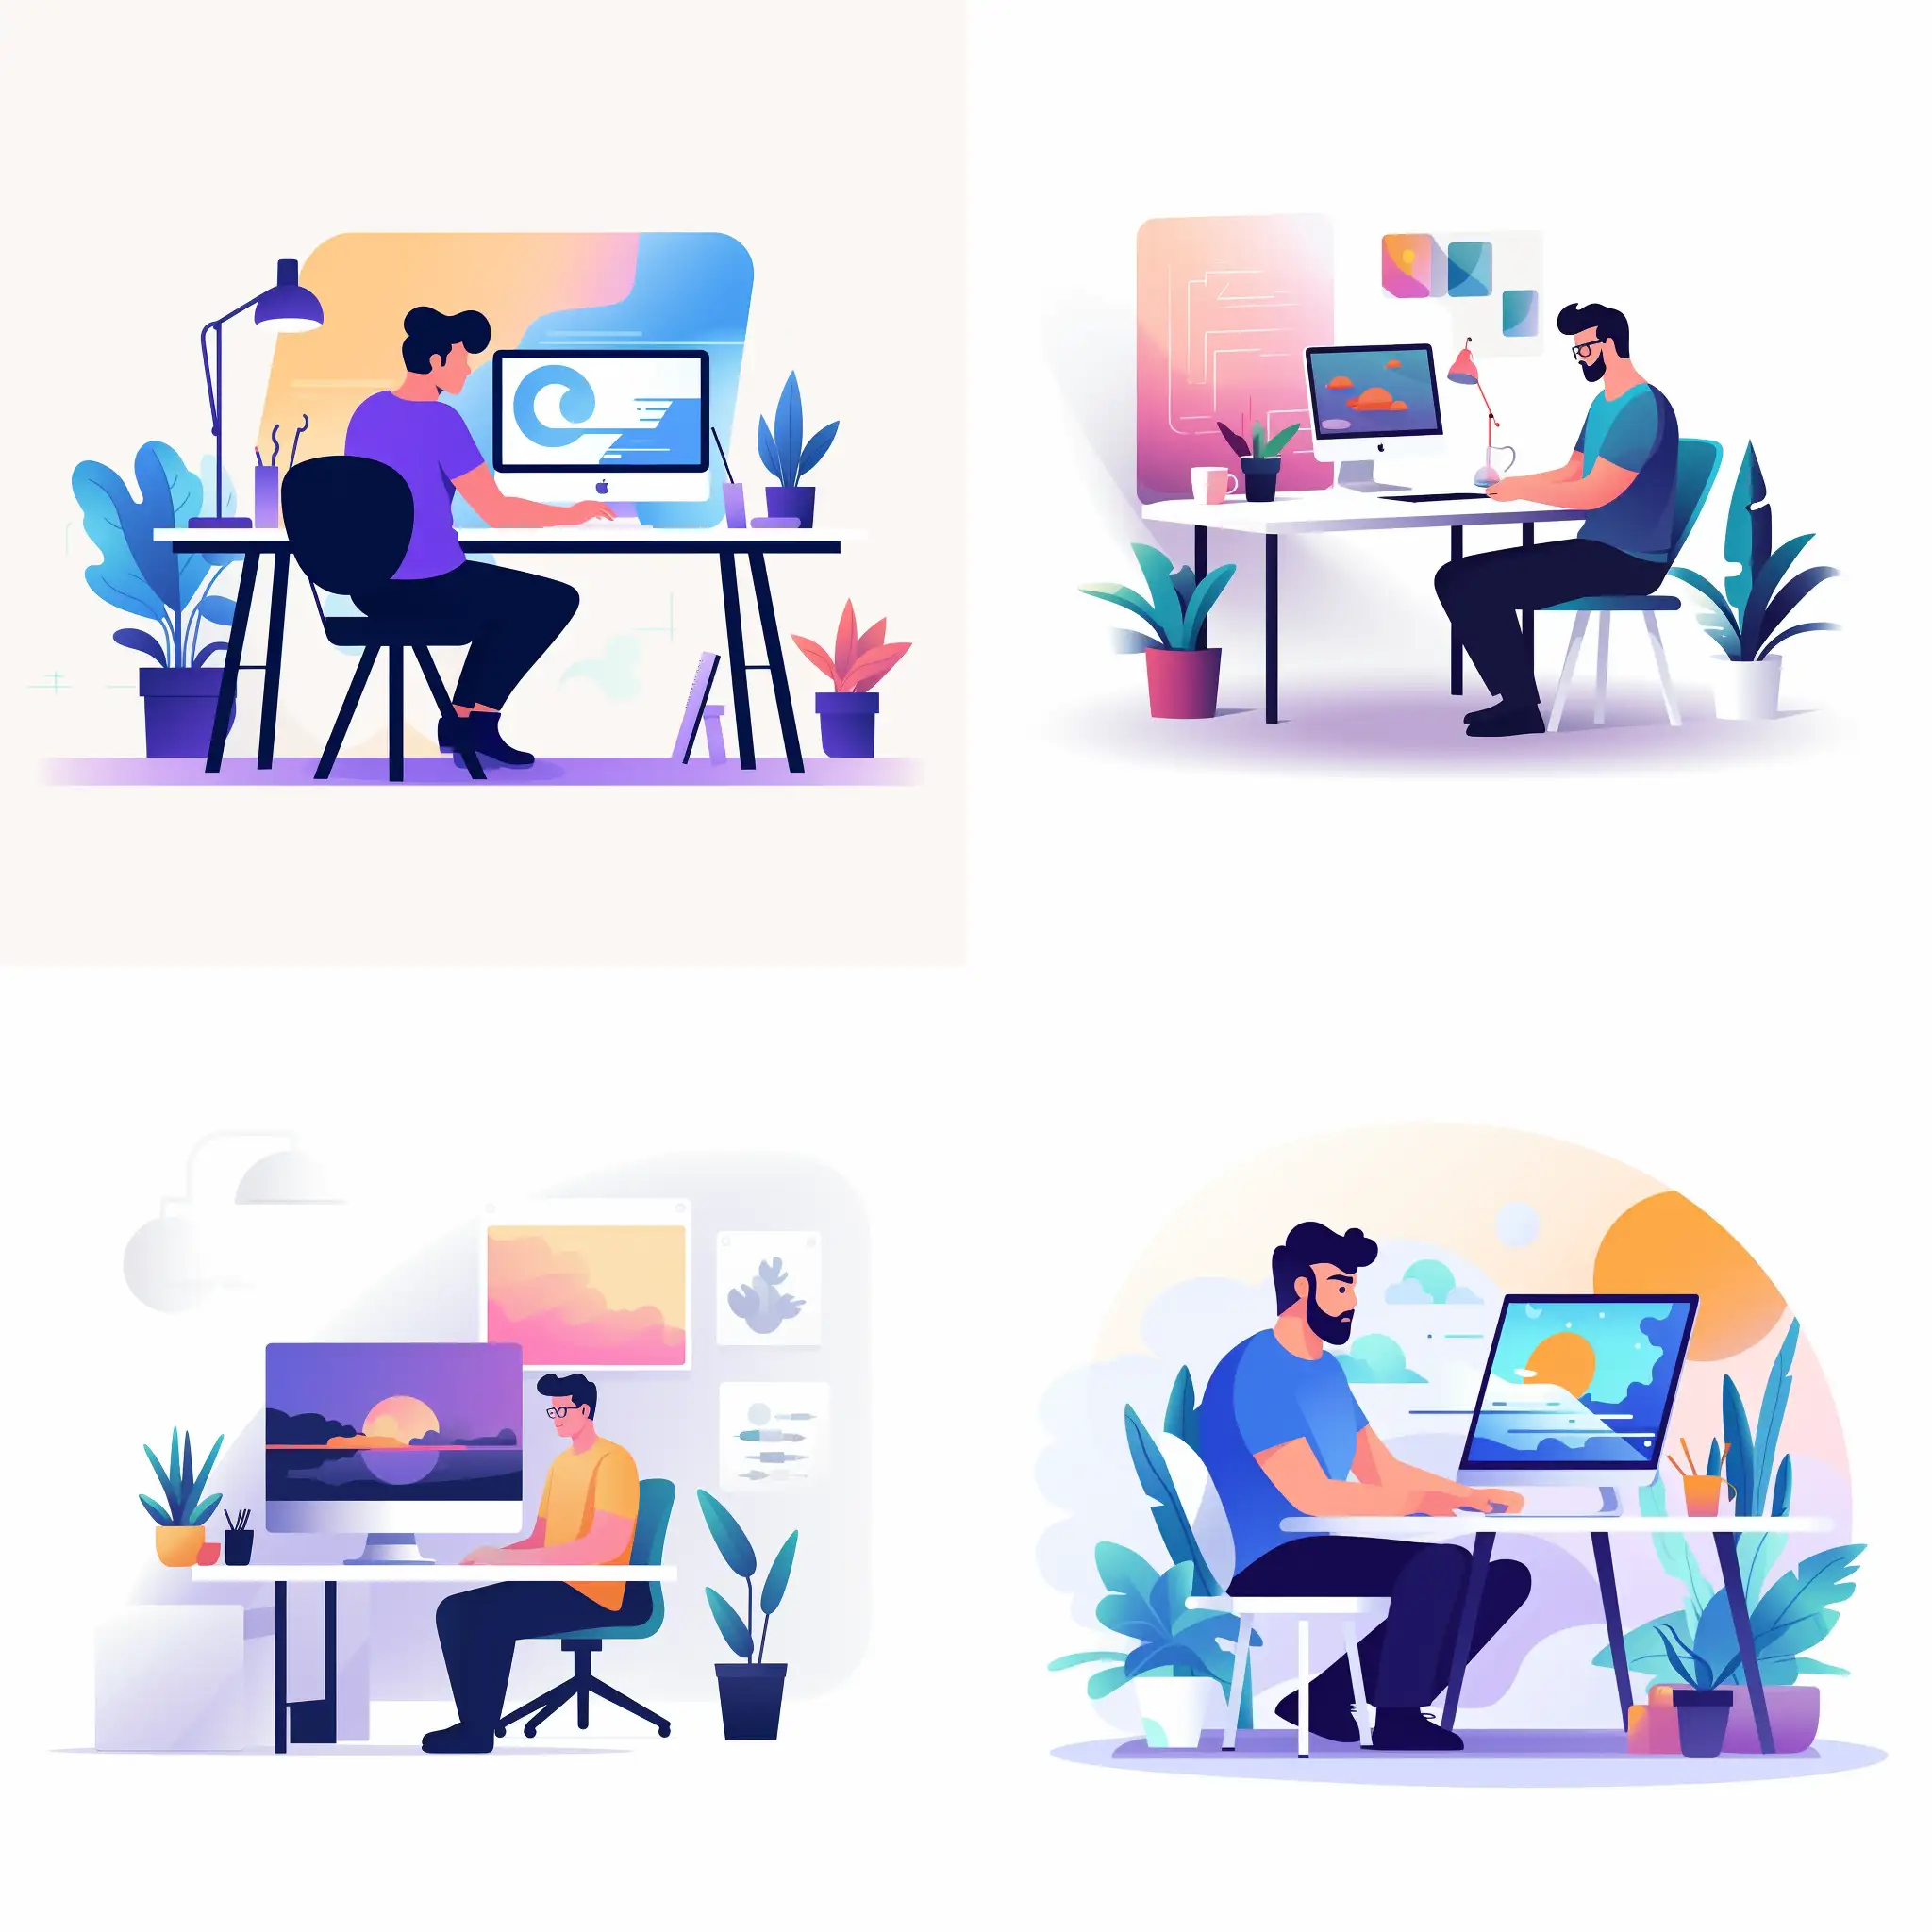 Minimalist UI illustration of a graphic designer designing on a wrokstation ,sitting in a modern design studio,  in a flat illustration style on a white background with bright color scheme, dribbble, flat vector